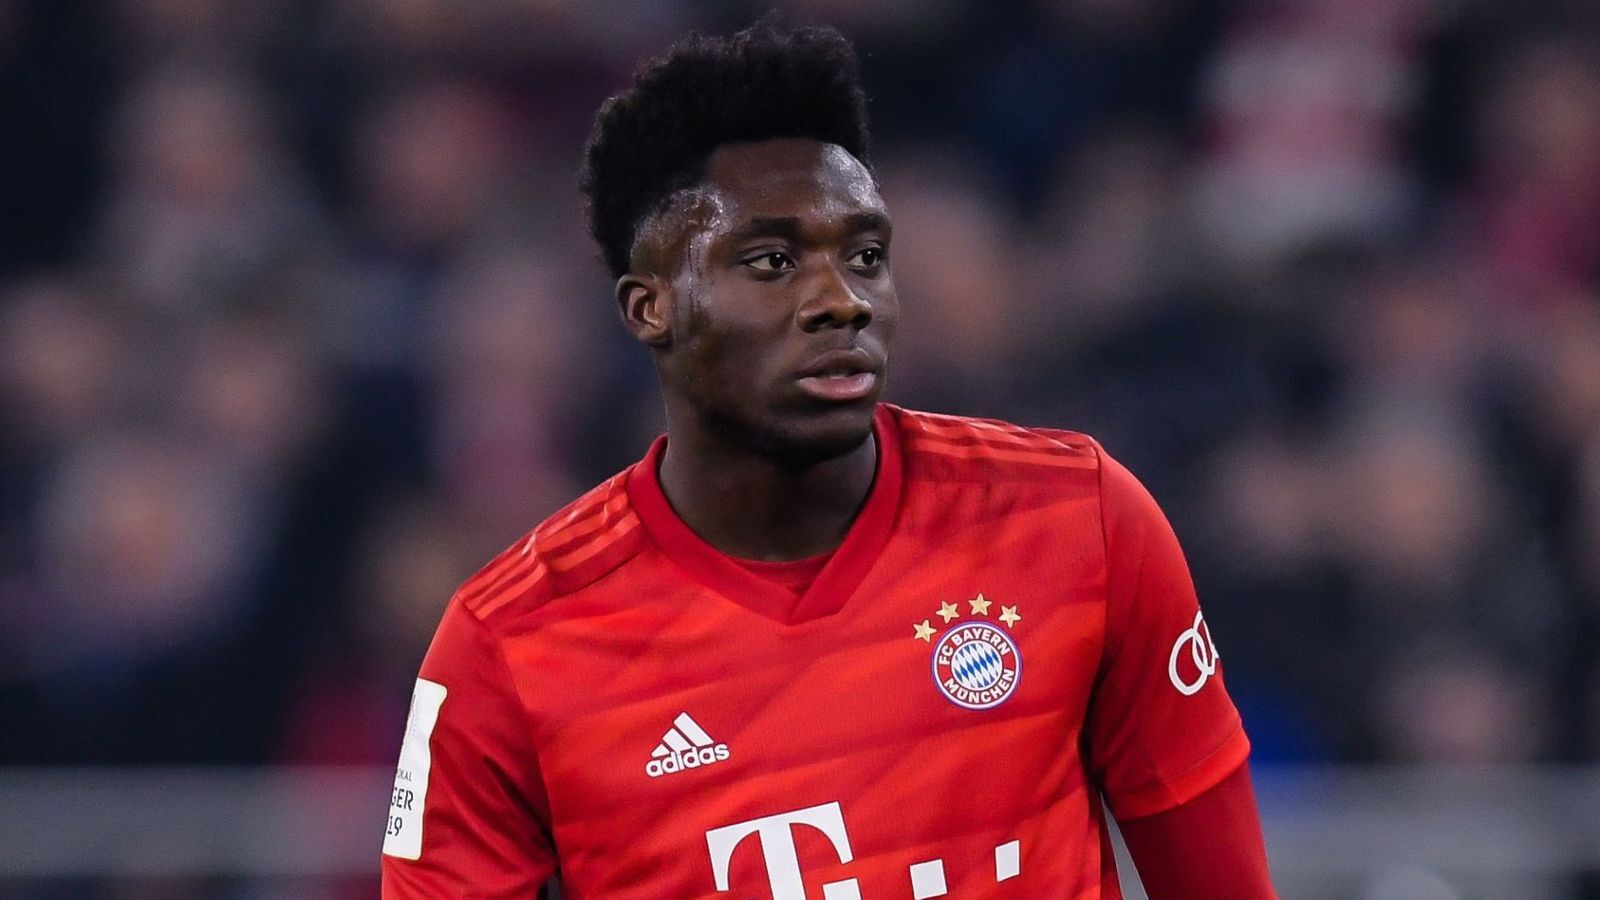 Alphonso Davies Named as Rookie of the Year by Bundesliga